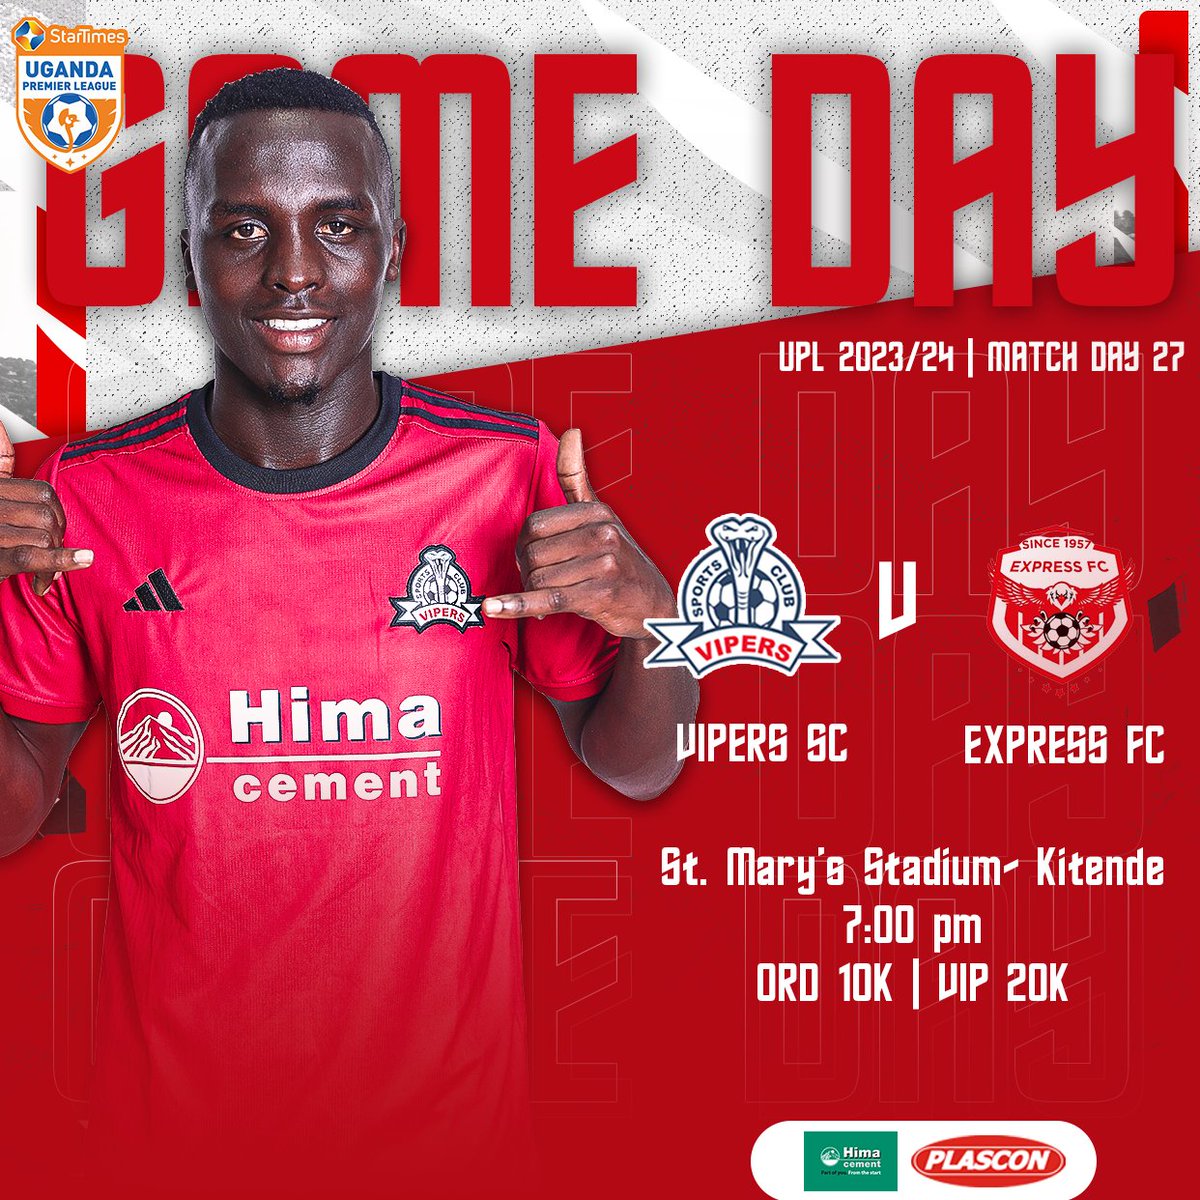 It’s Matchday at St Mary's Stadium 🏟️ 🏡

For the last time under the lights this season 2023/24. 

Let's do this Venooooooms 💪🏾

#VIPEXP || #VenomsUpdates || #OneTeamOneDream ||